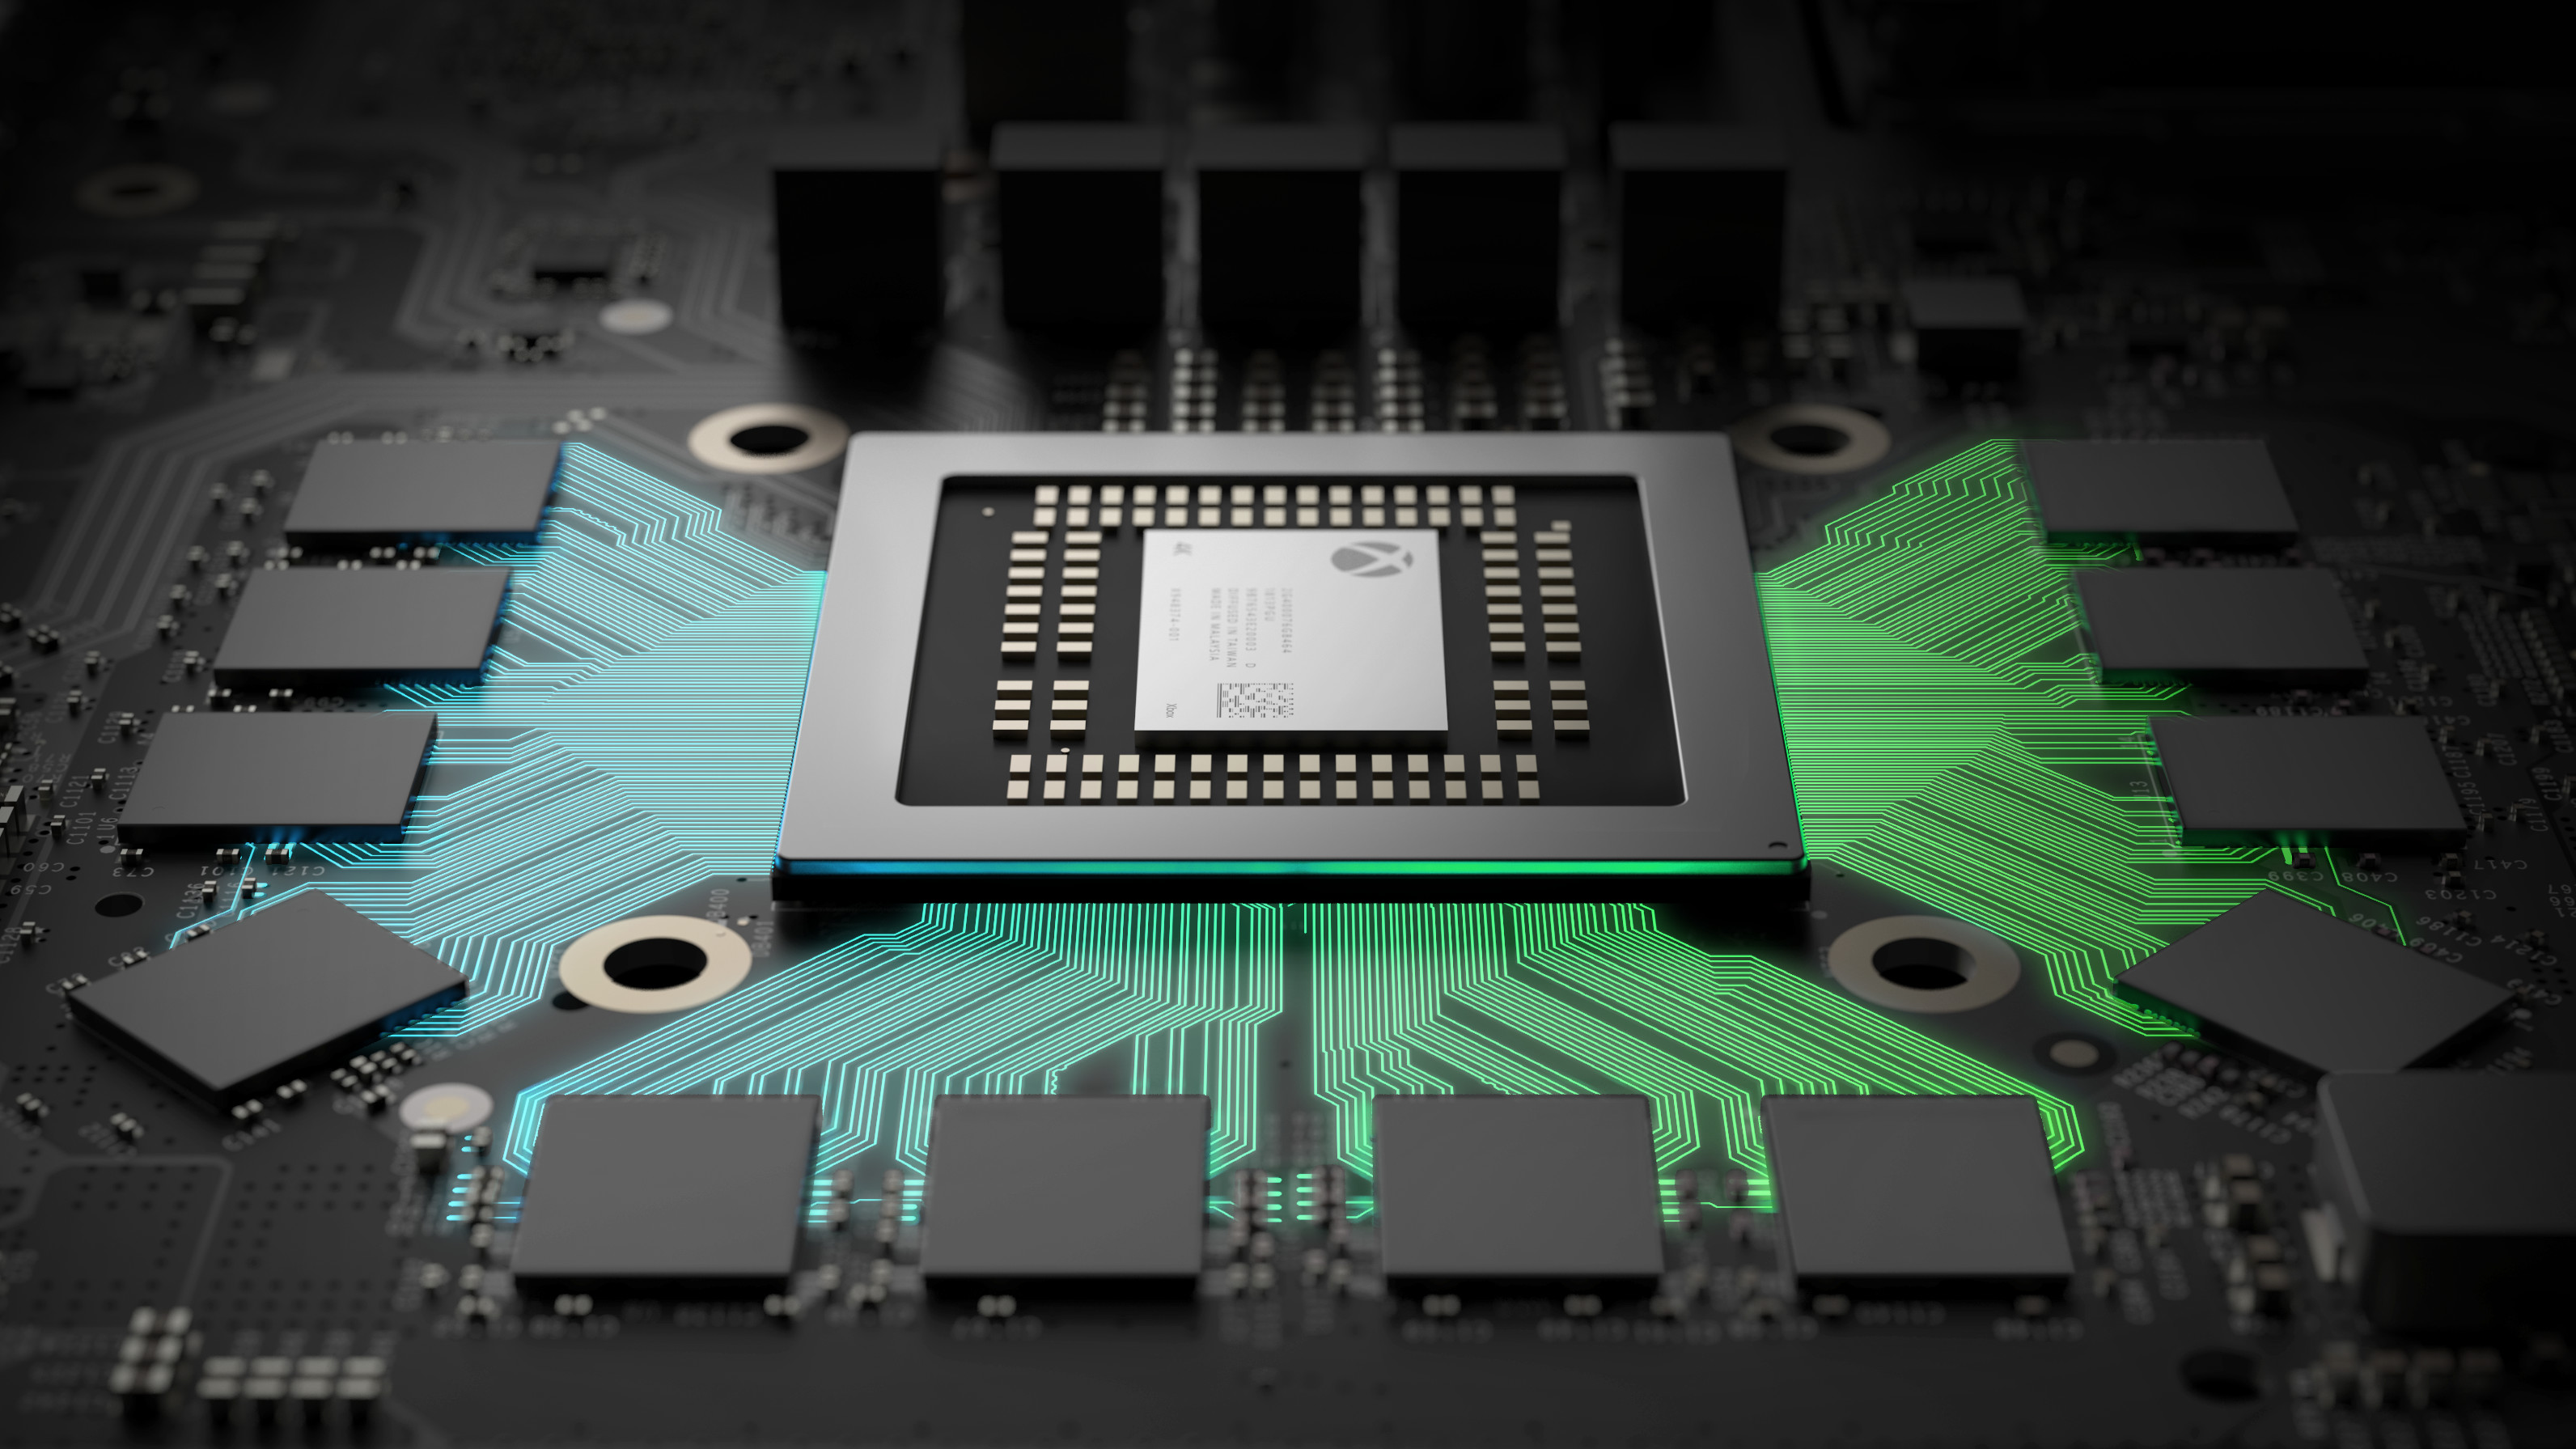 3184x1791 Project-Scorpio-System-on-a-chip-edition-1080p-ish-wallpaper-wpt8007996